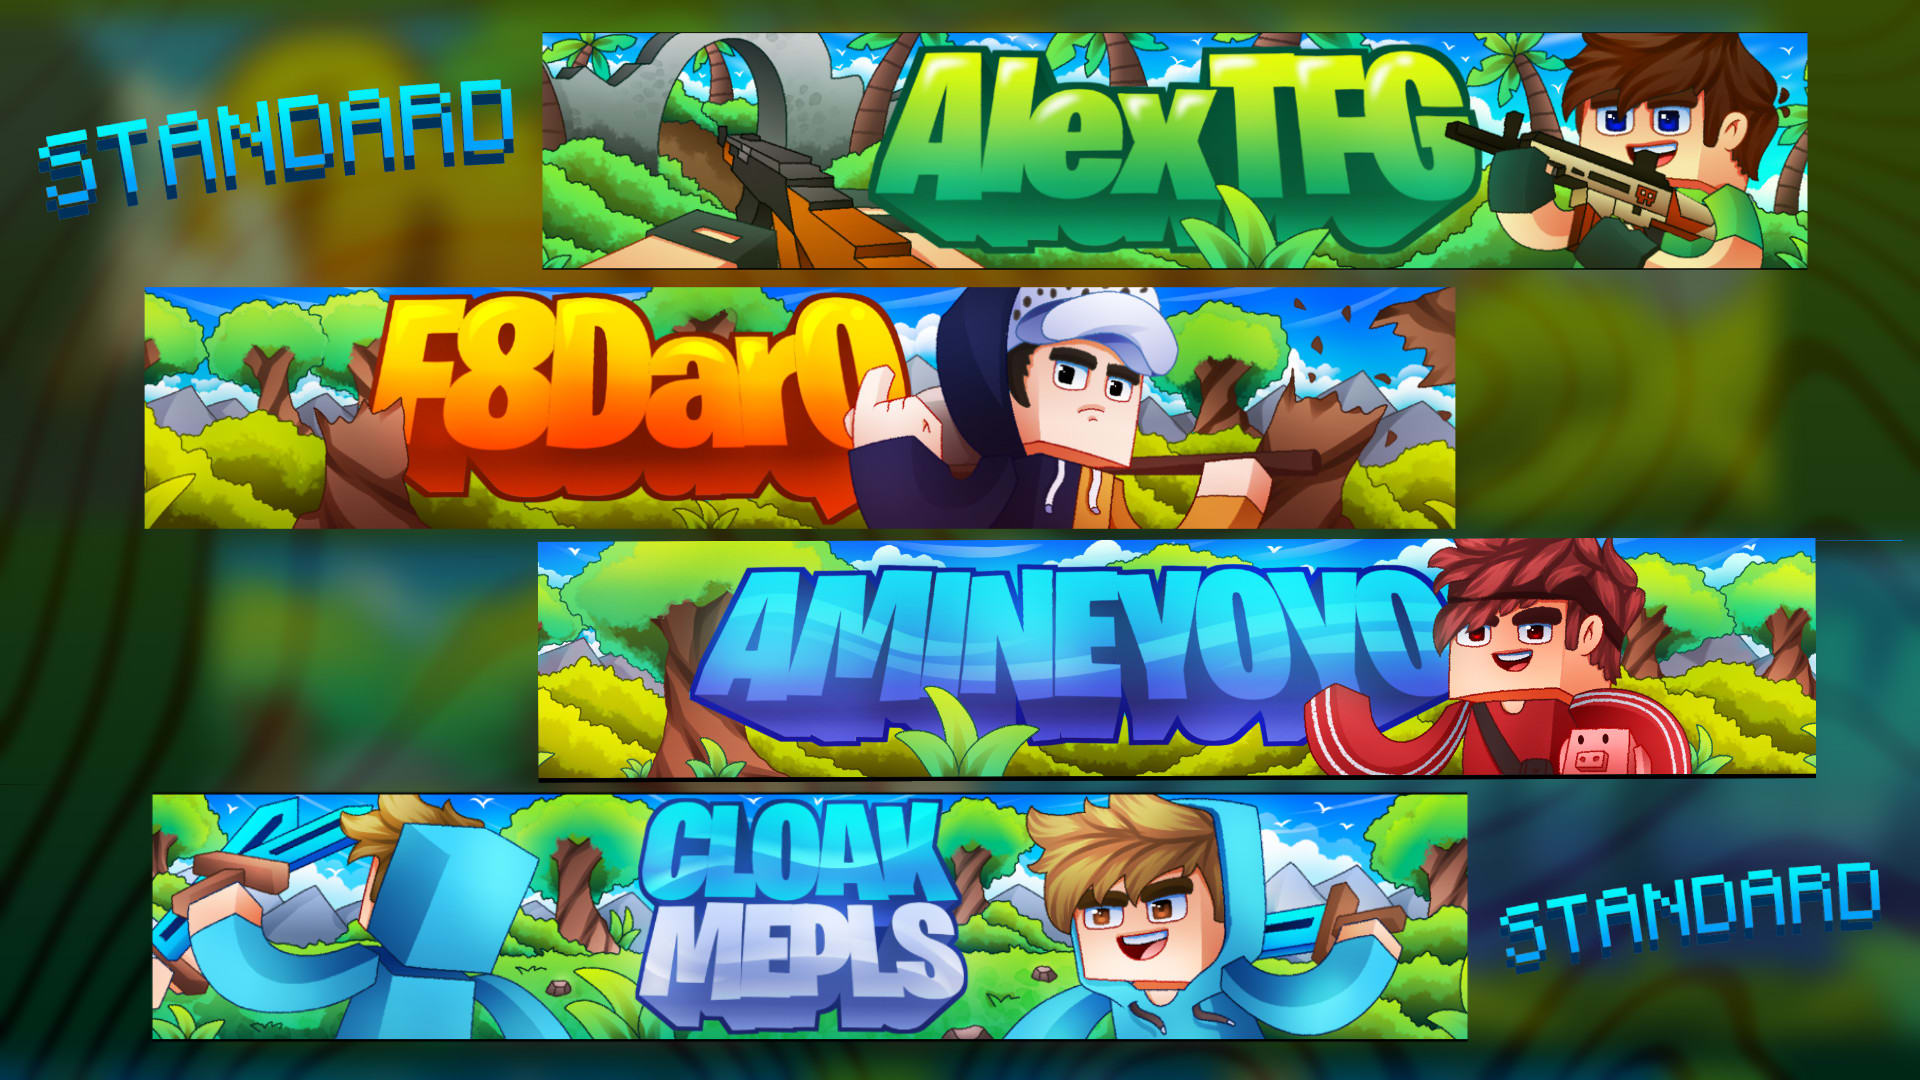 Do your youtube banner in minecraft style by Buffartworks | Fiverr